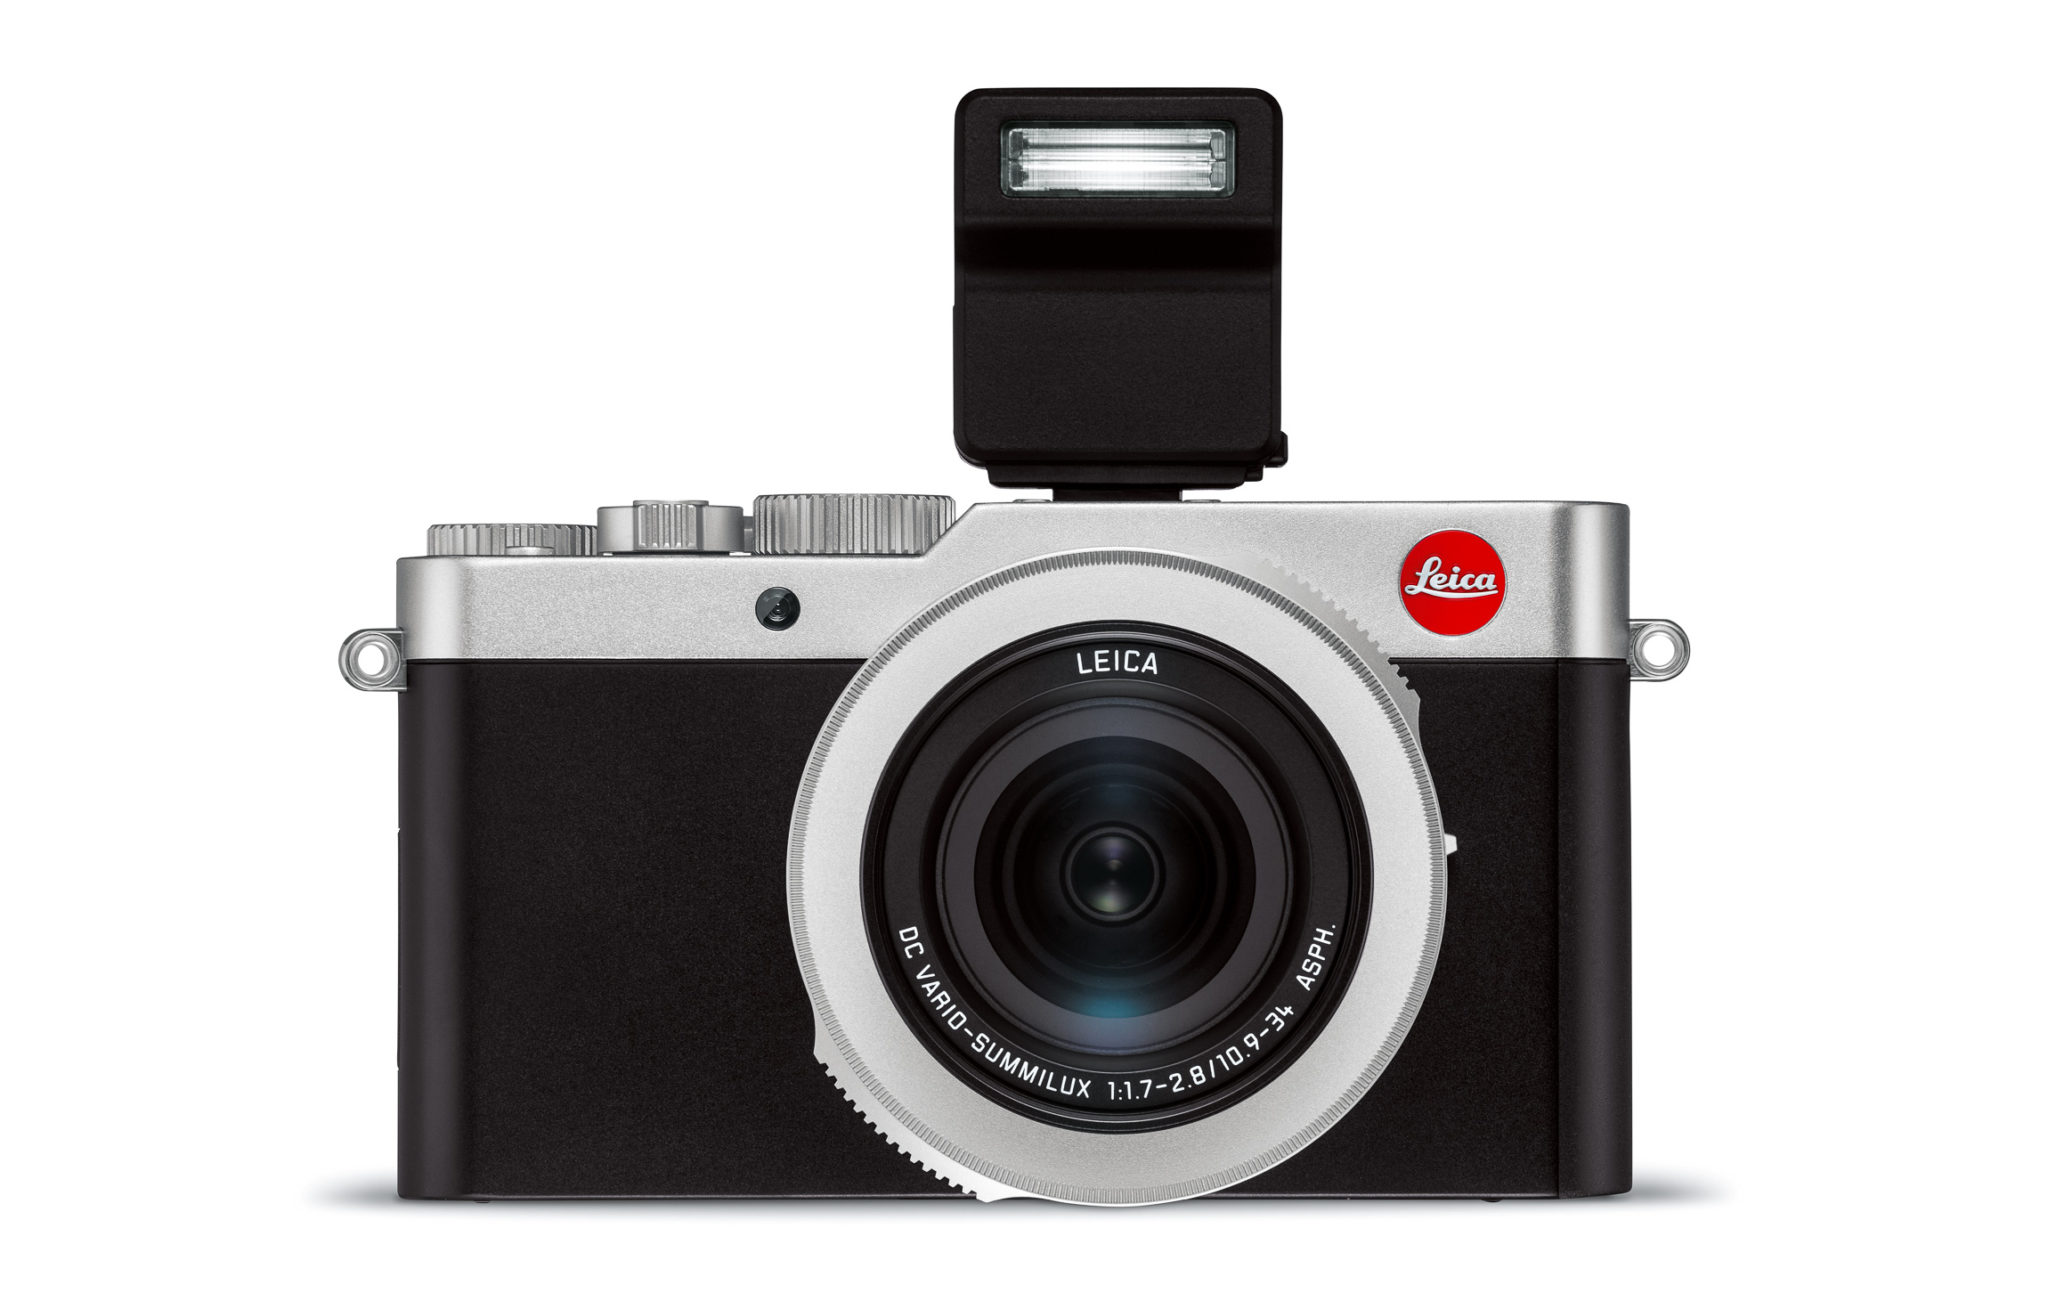 Leica D-Lux 7- compact camera introduce luxury and quality to the pictures